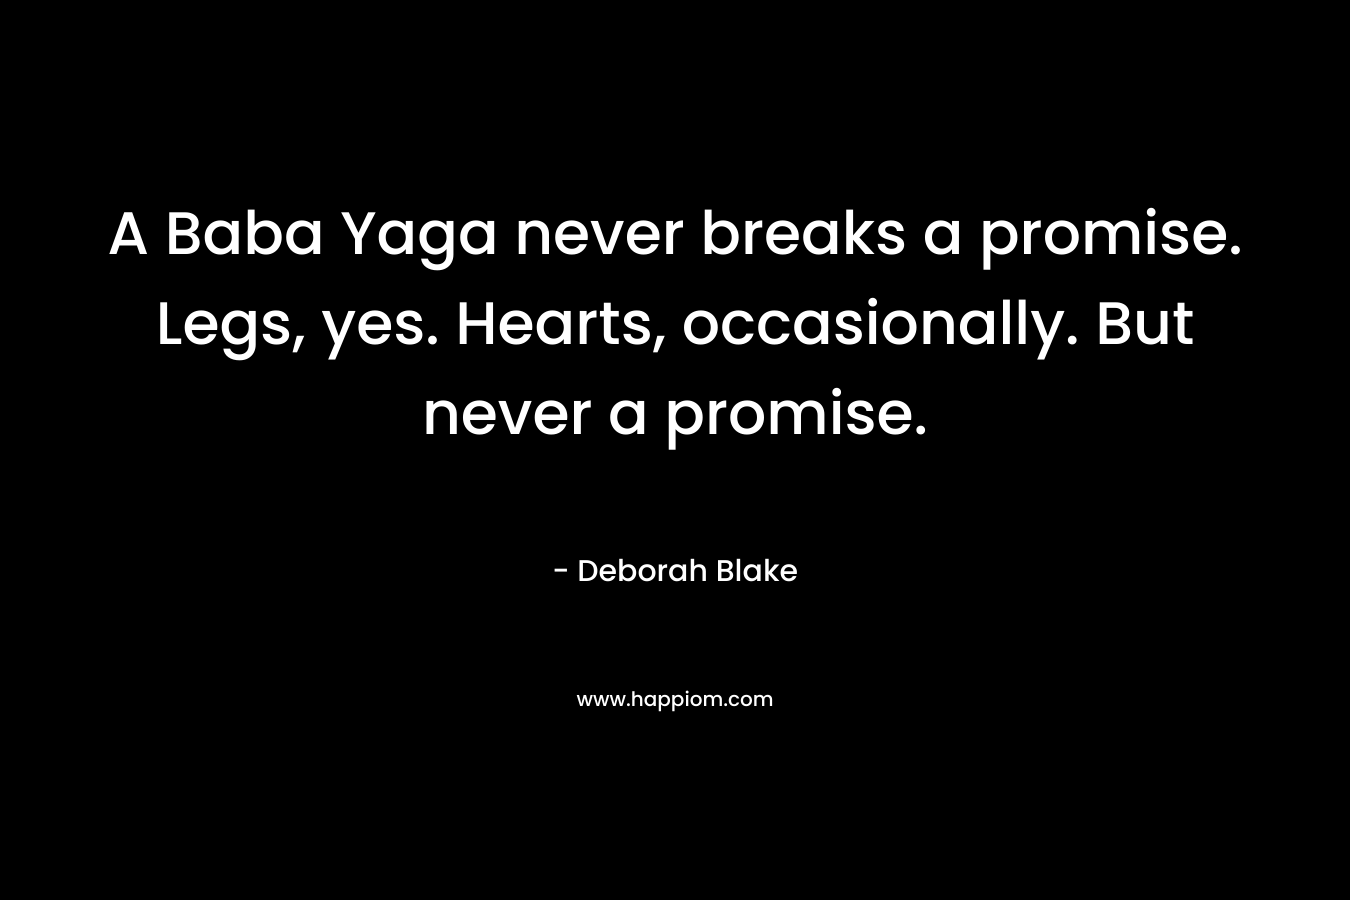 A Baba Yaga never breaks a promise. Legs, yes. Hearts, occasionally. But never a promise.